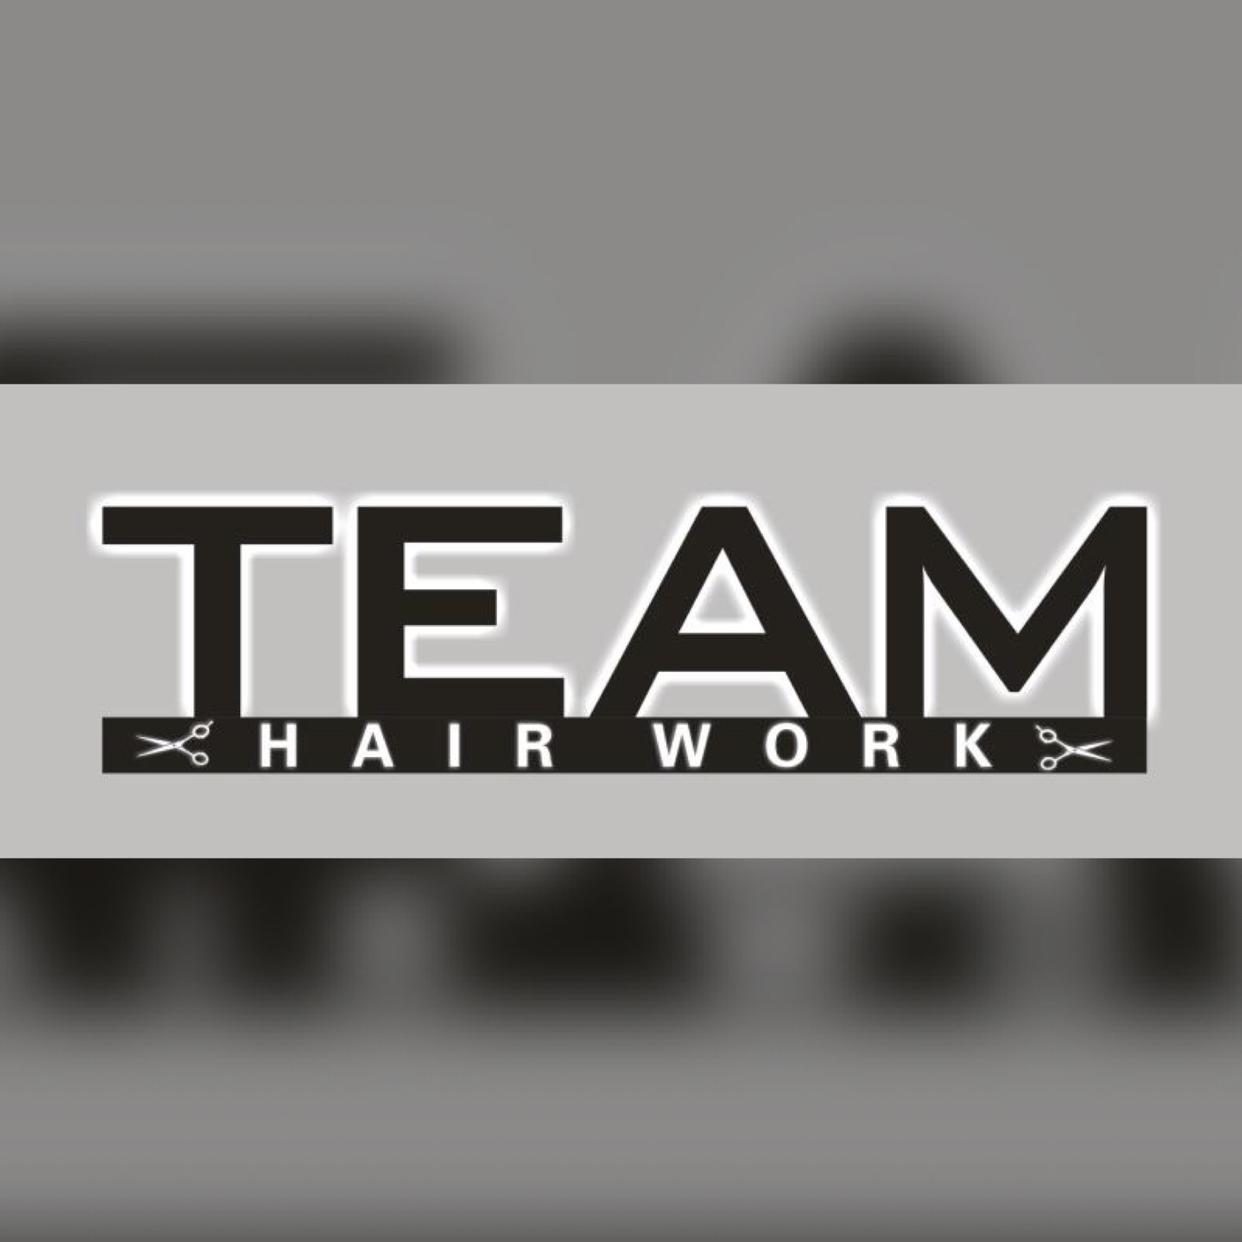 Team Hair's images